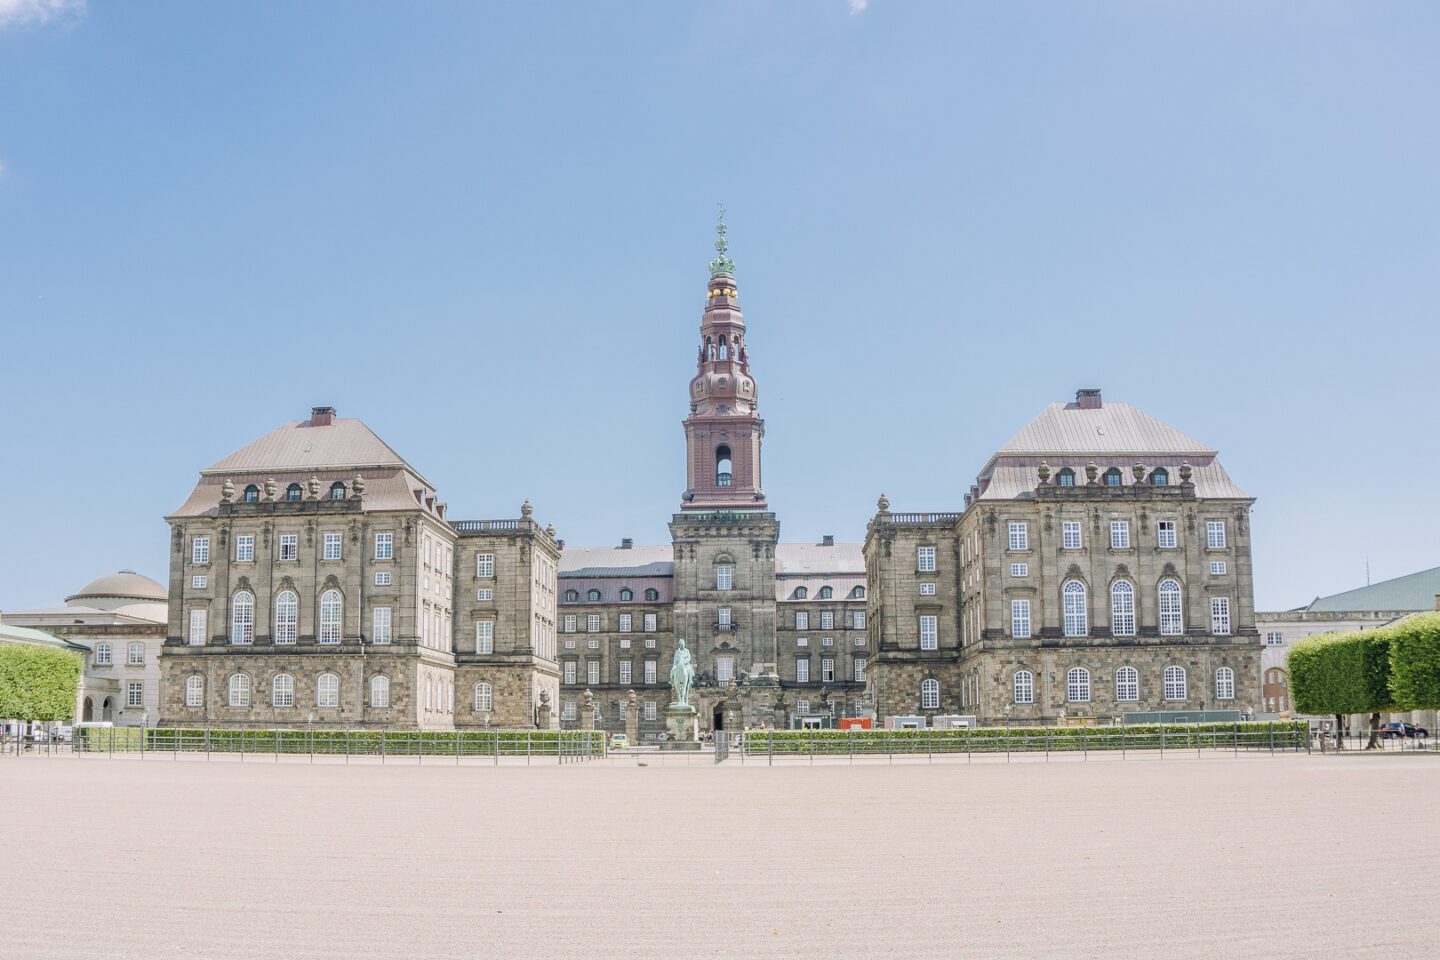 Danish parliament's Christiansborg Palace and massive courtyard gardens in the centre of Copenhagen